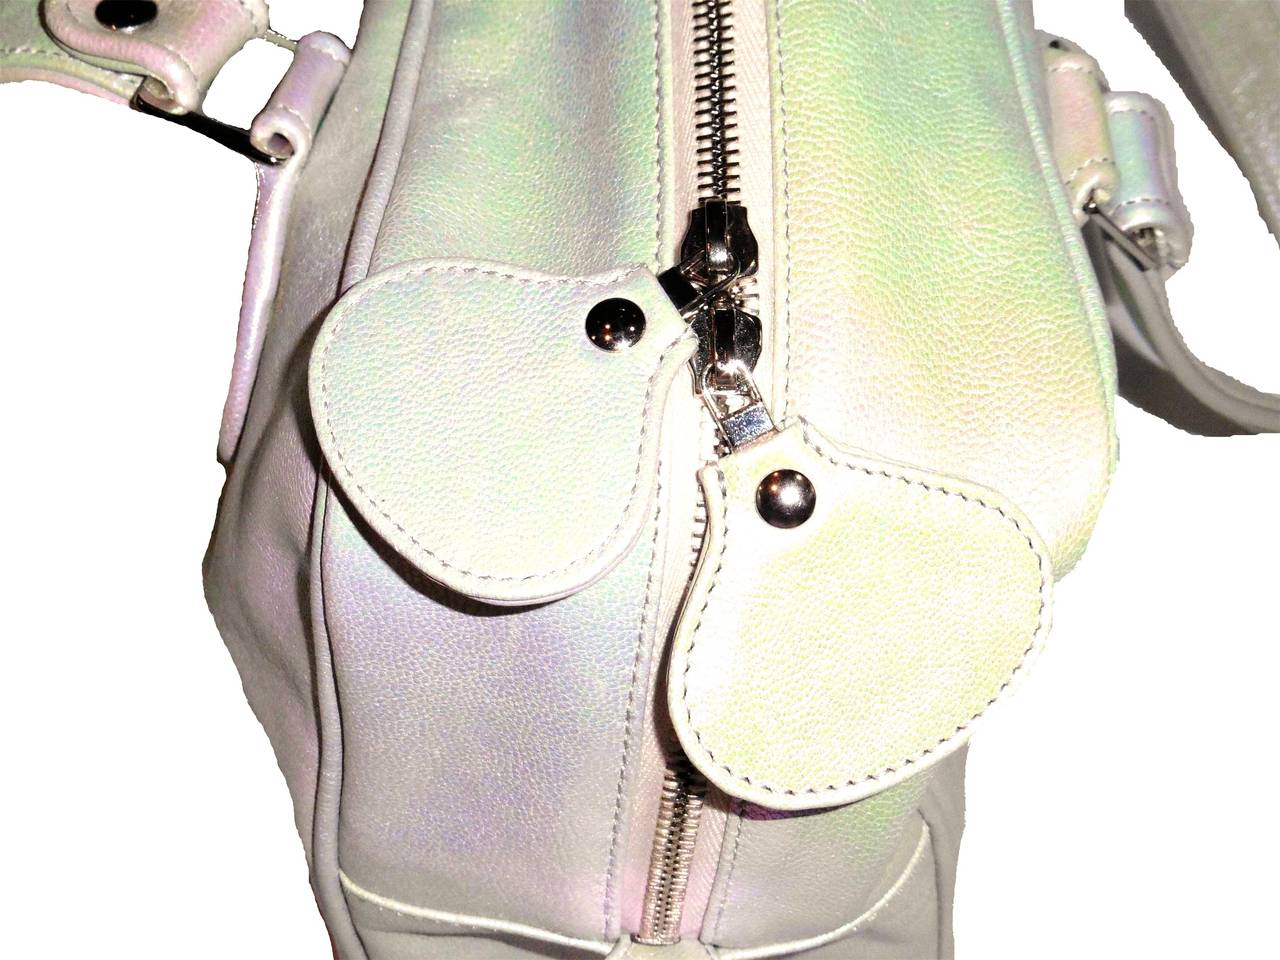 Women's Courreges Iconic New Goat Skin Purse in Pearlescent Grey